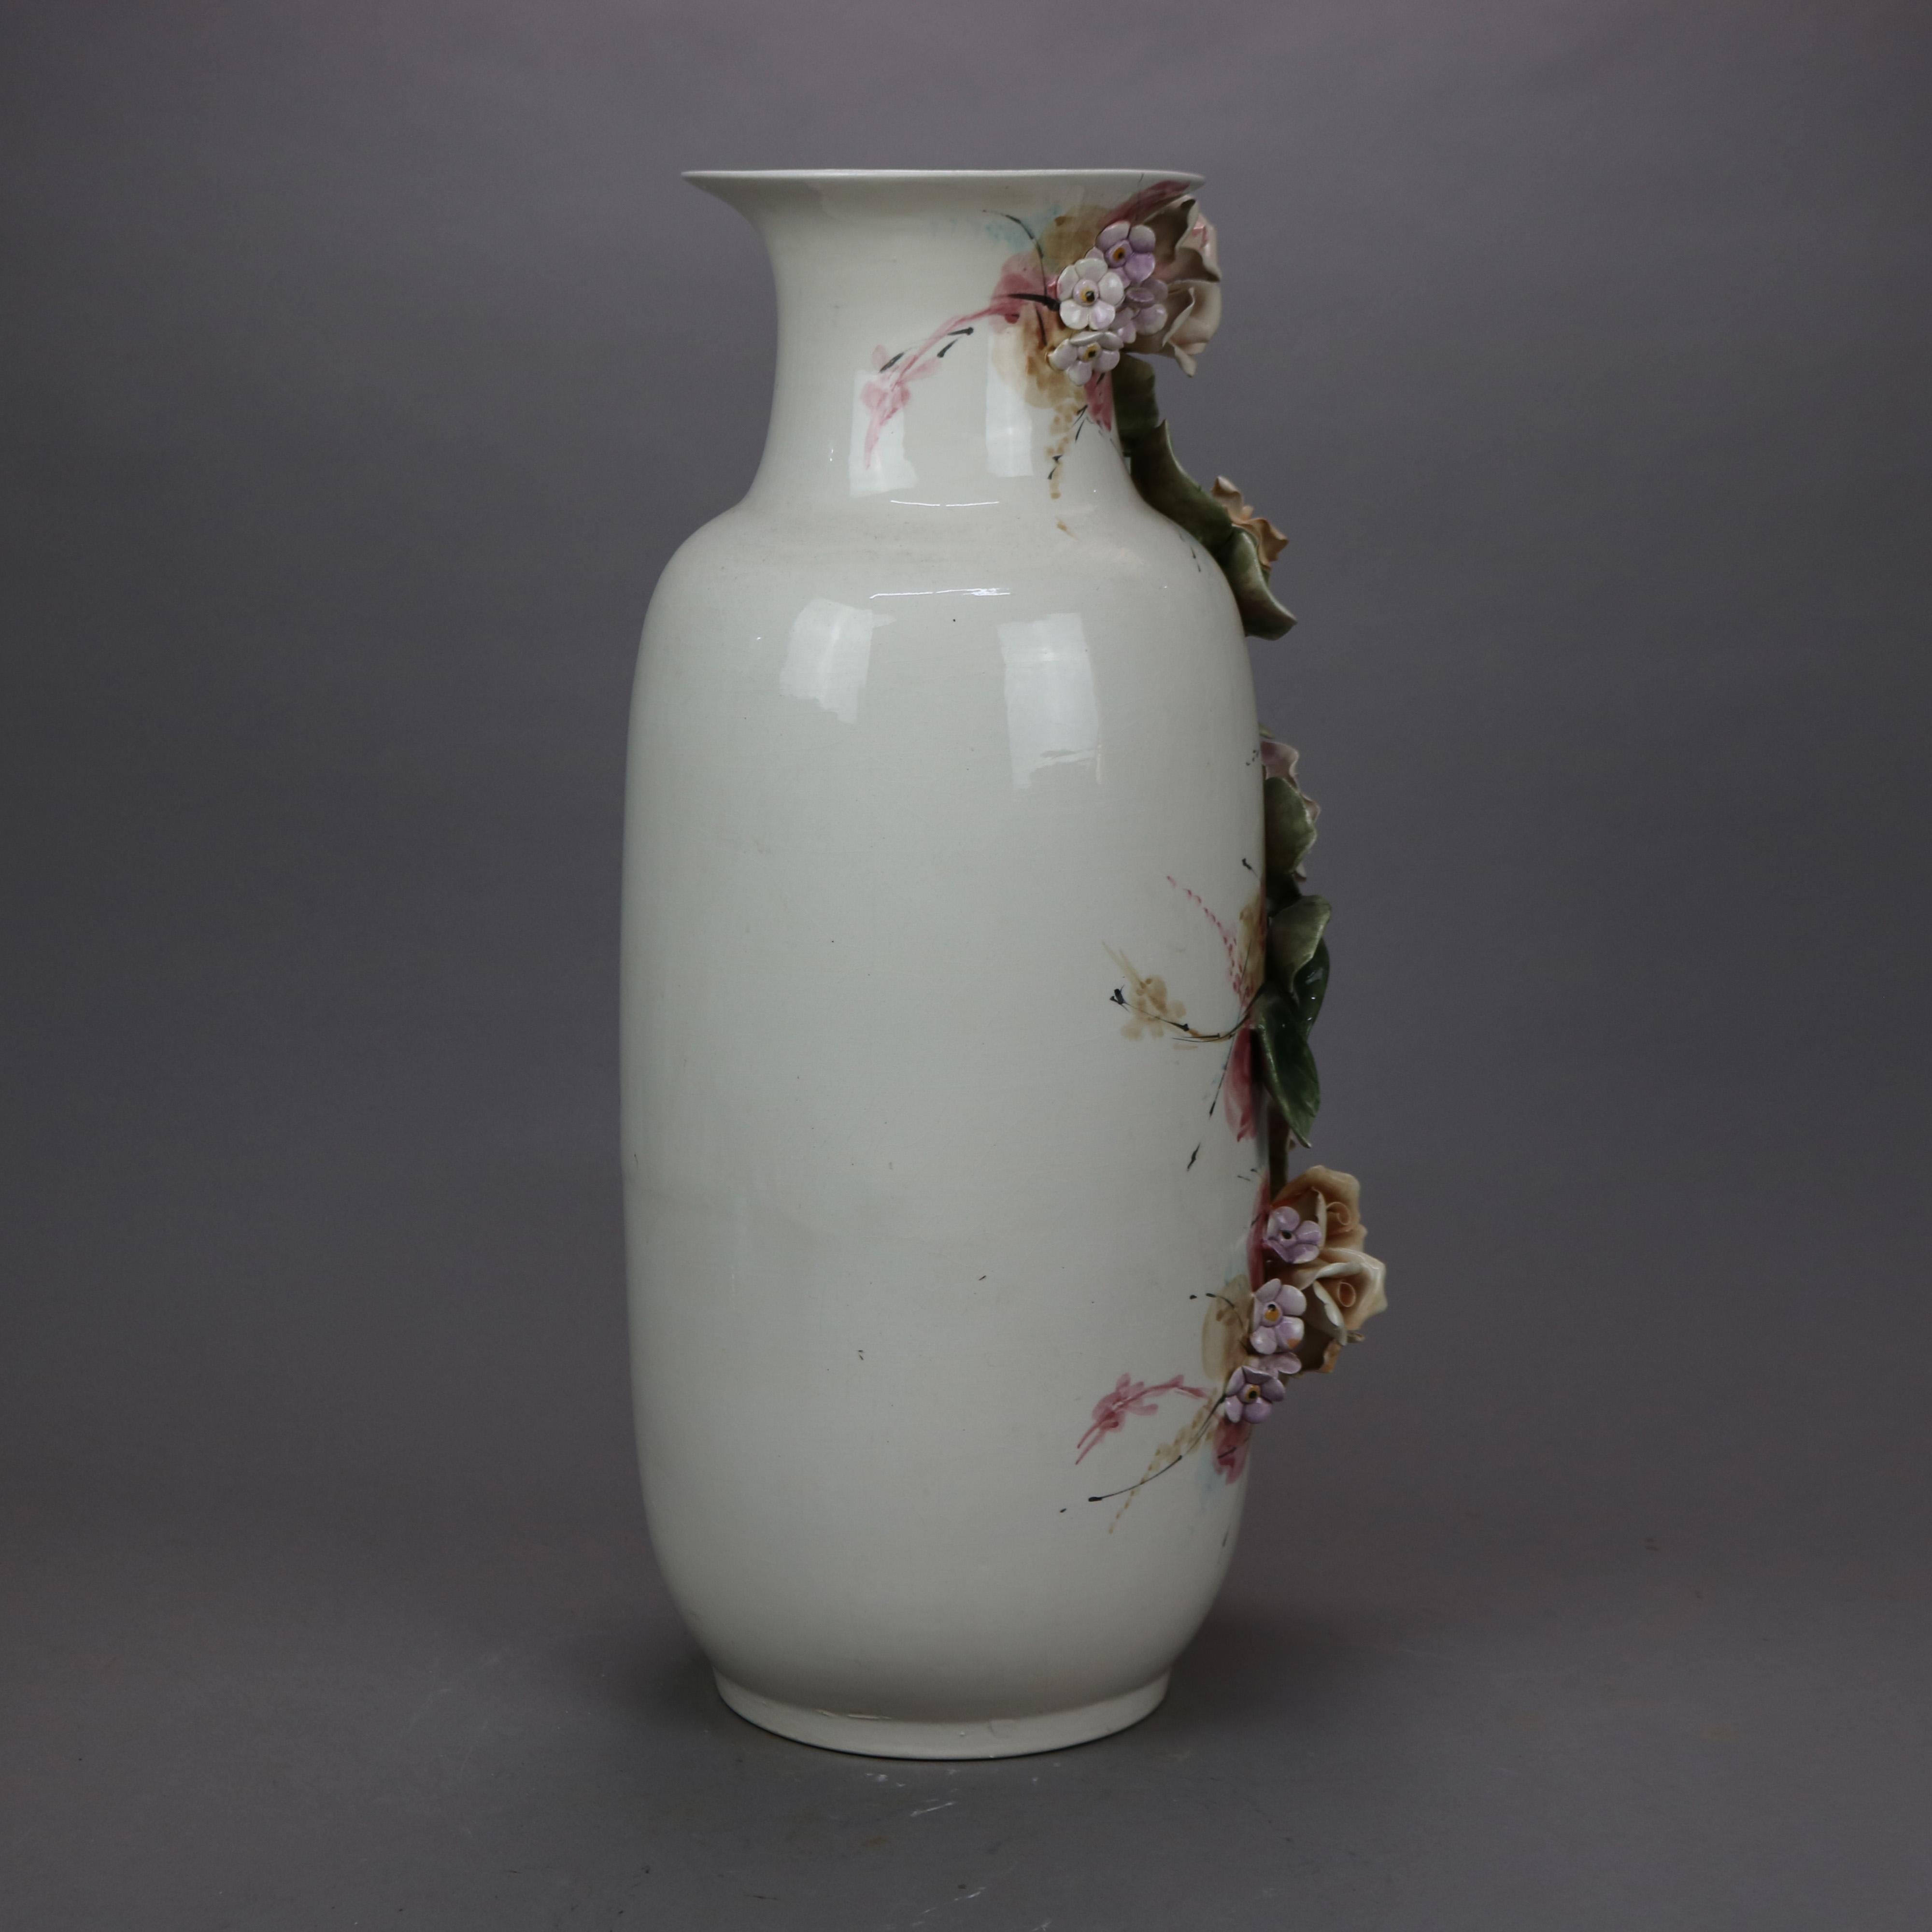 capodimonte vase with flowers made in italy